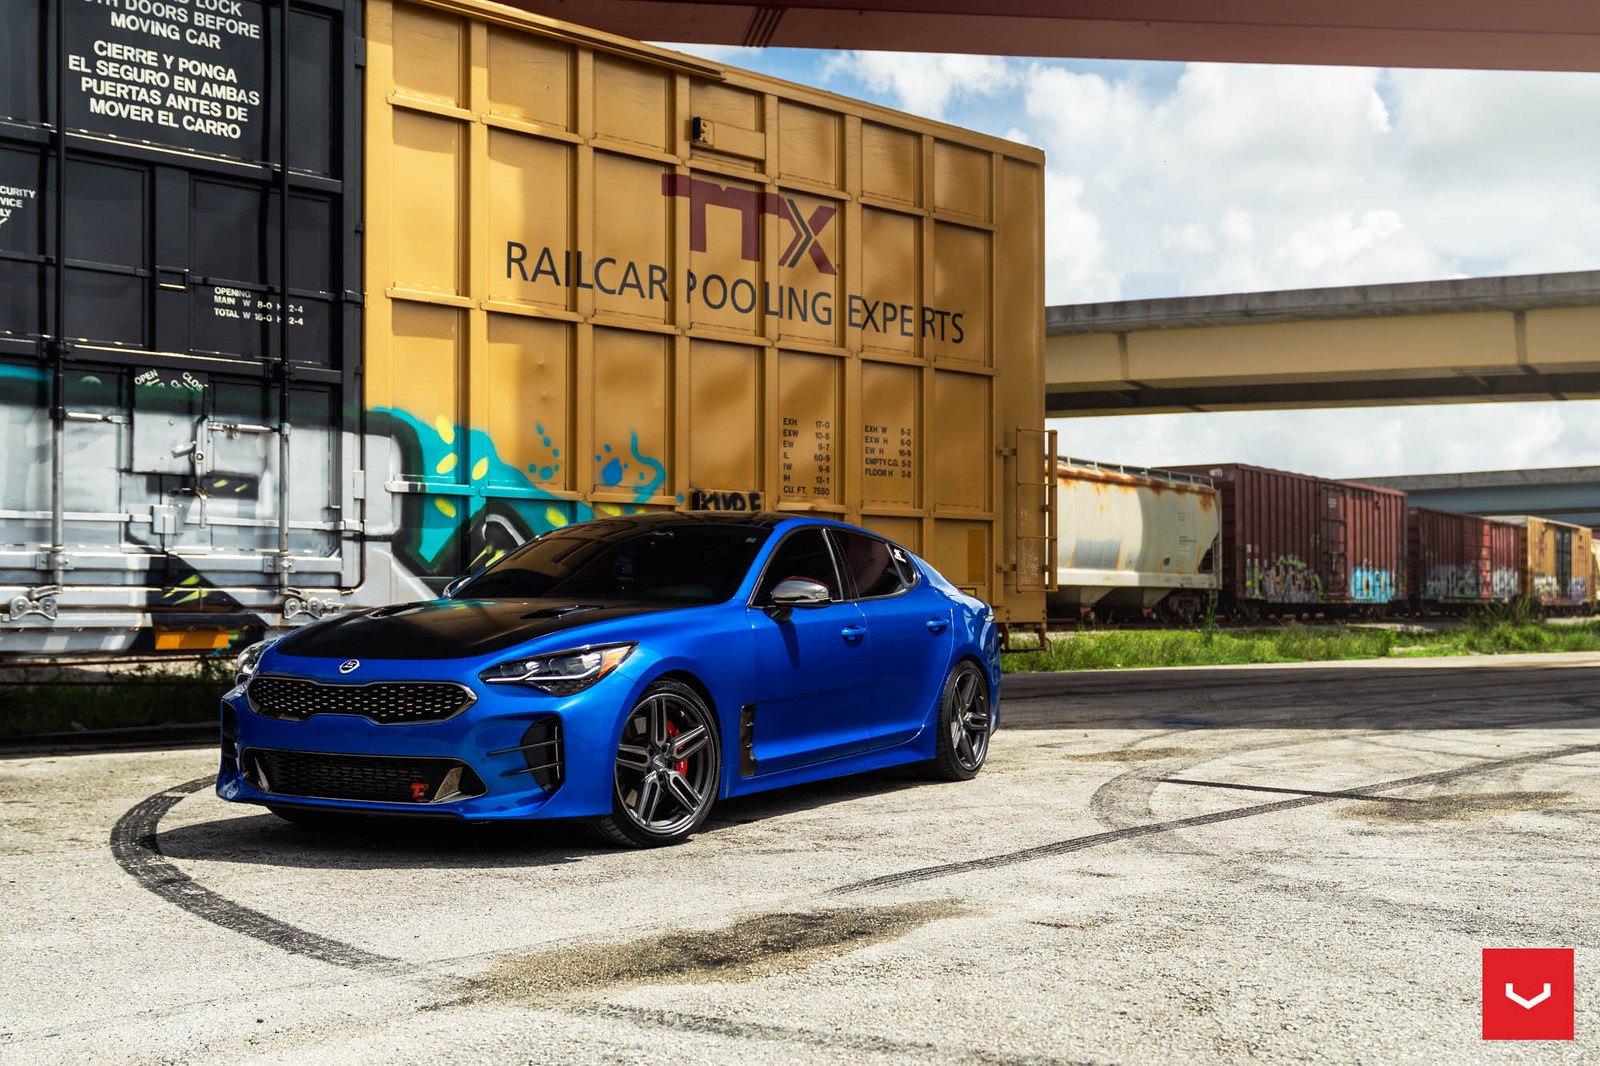 Blacked Out Mesh Grille on Blue Kia Stinger - Photo by Vossen